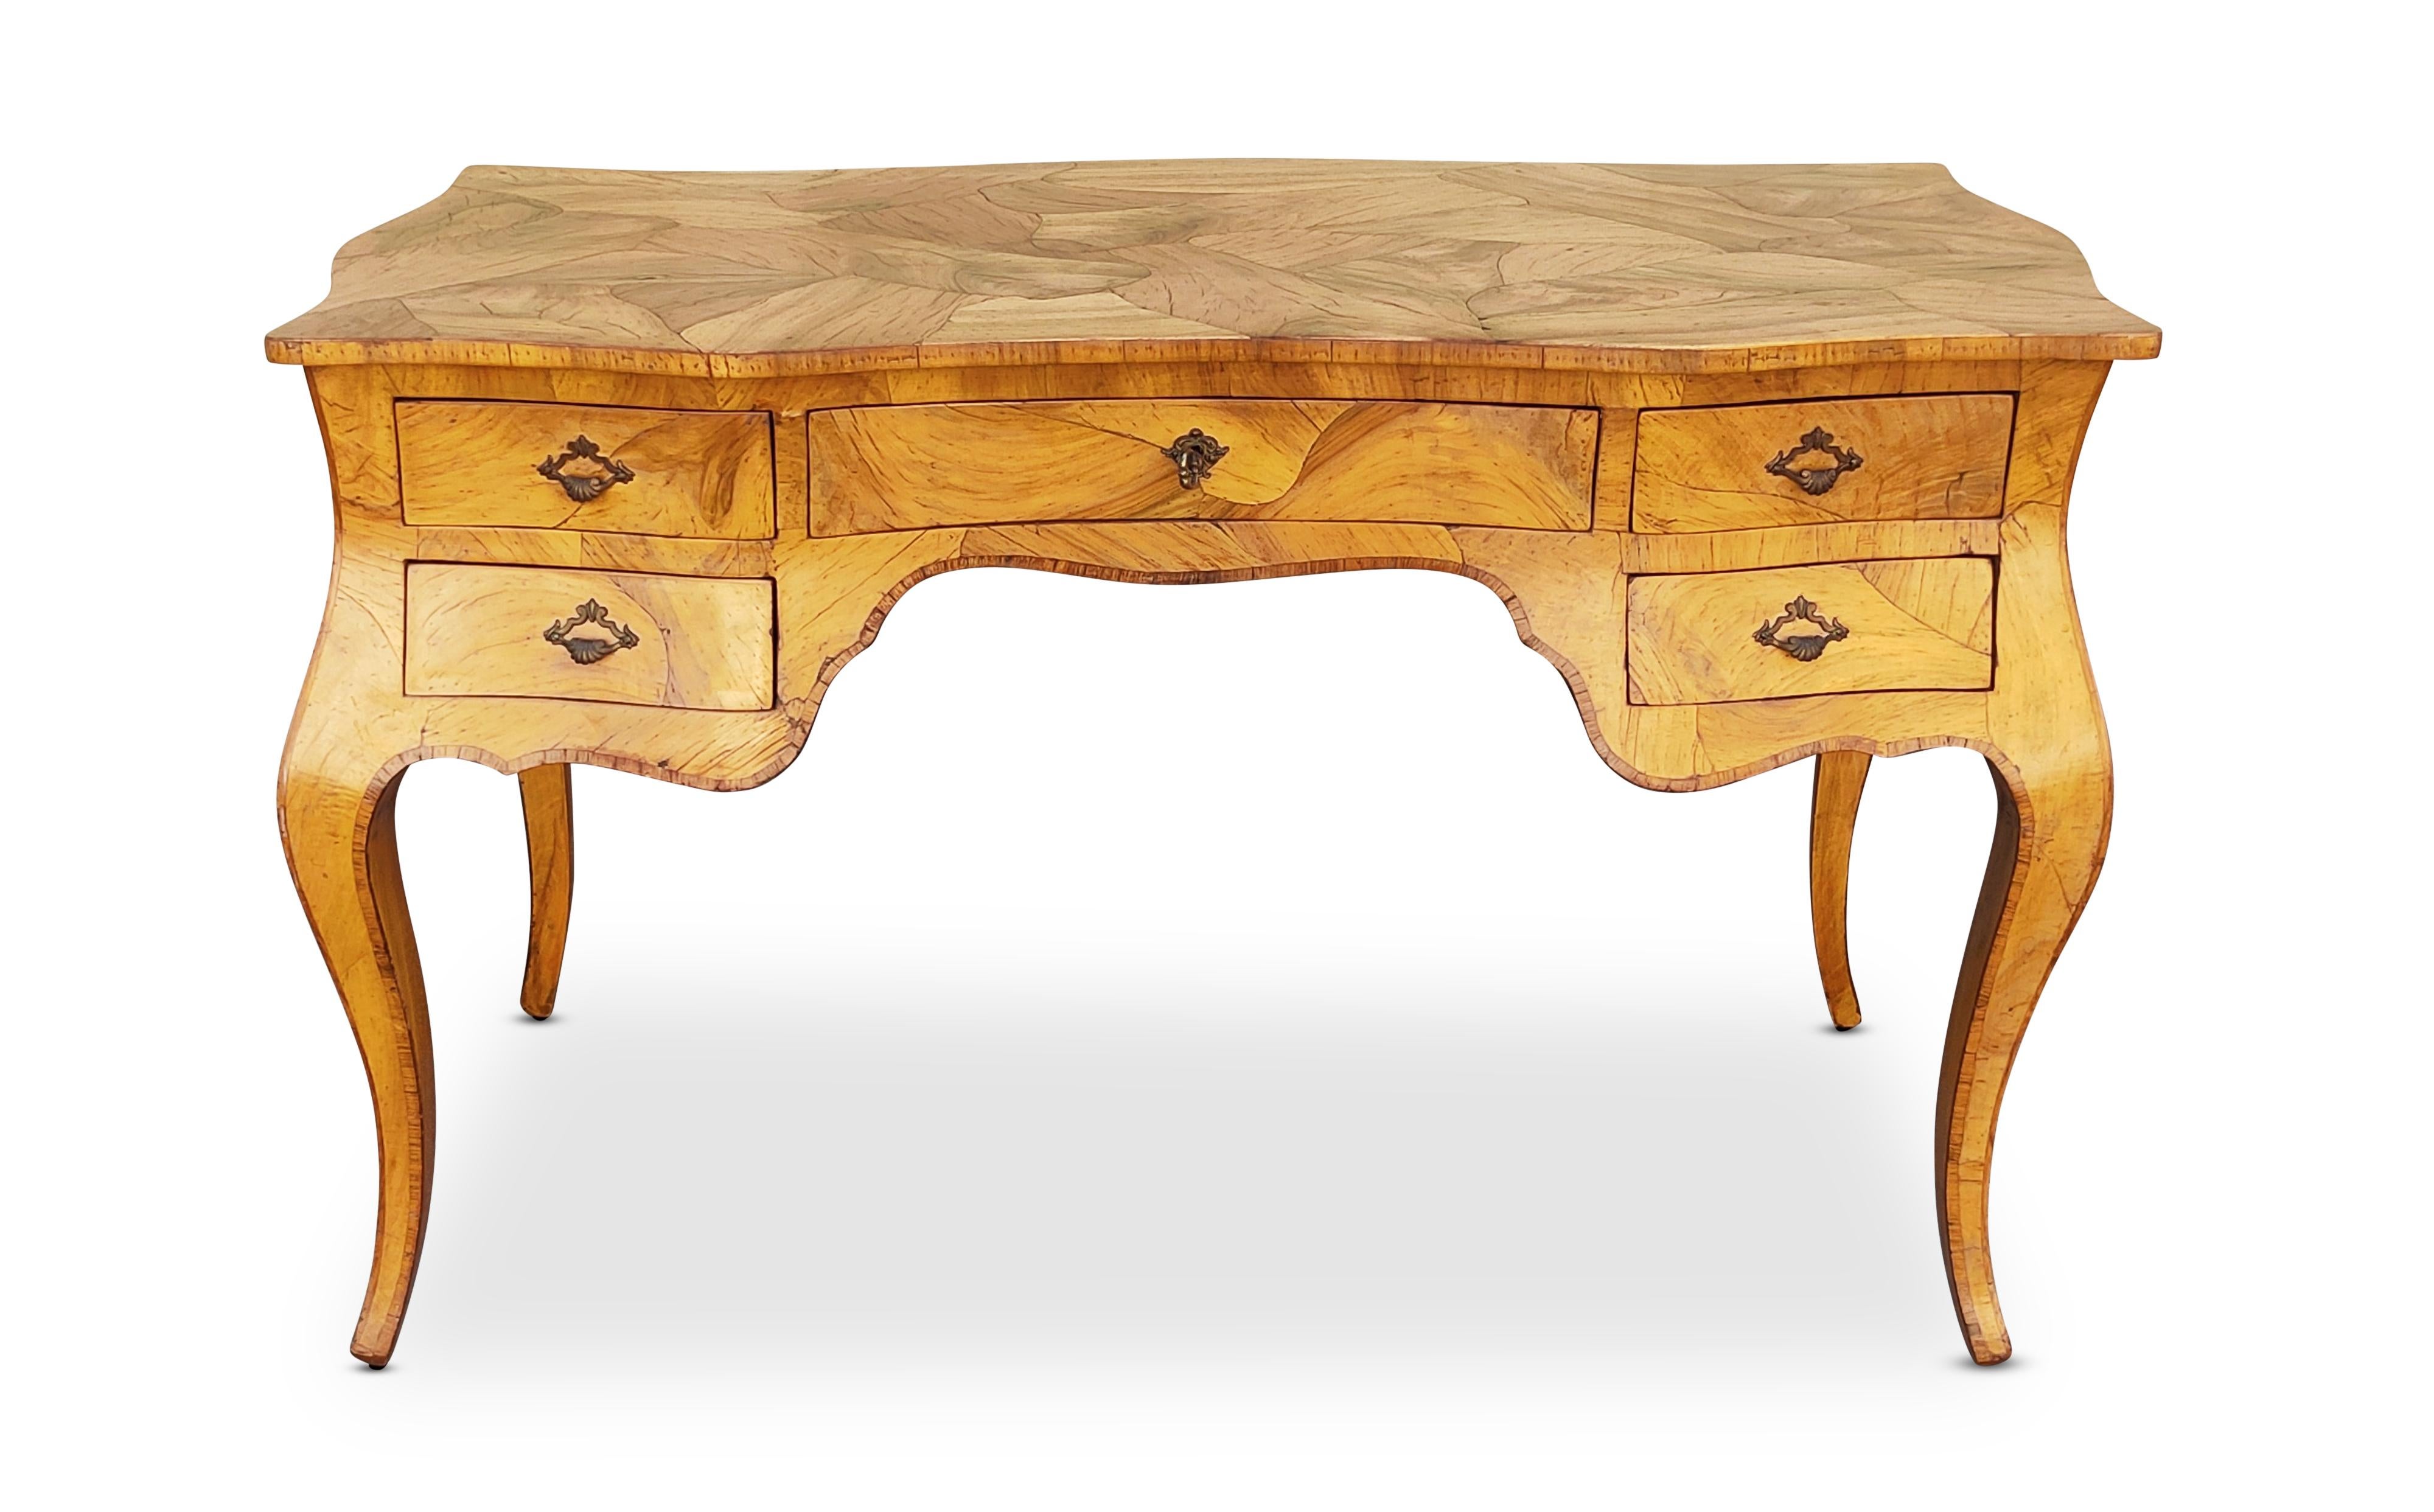 Hand-made in Italy, circa 1950s or 60s, this gorgeous 5-drawer Louis XV or Bombay style desk in Italian walnut burl with antiqued brass hardware. This desk has been in my collections for several years. Purchased in an upscale Long Island home. It is